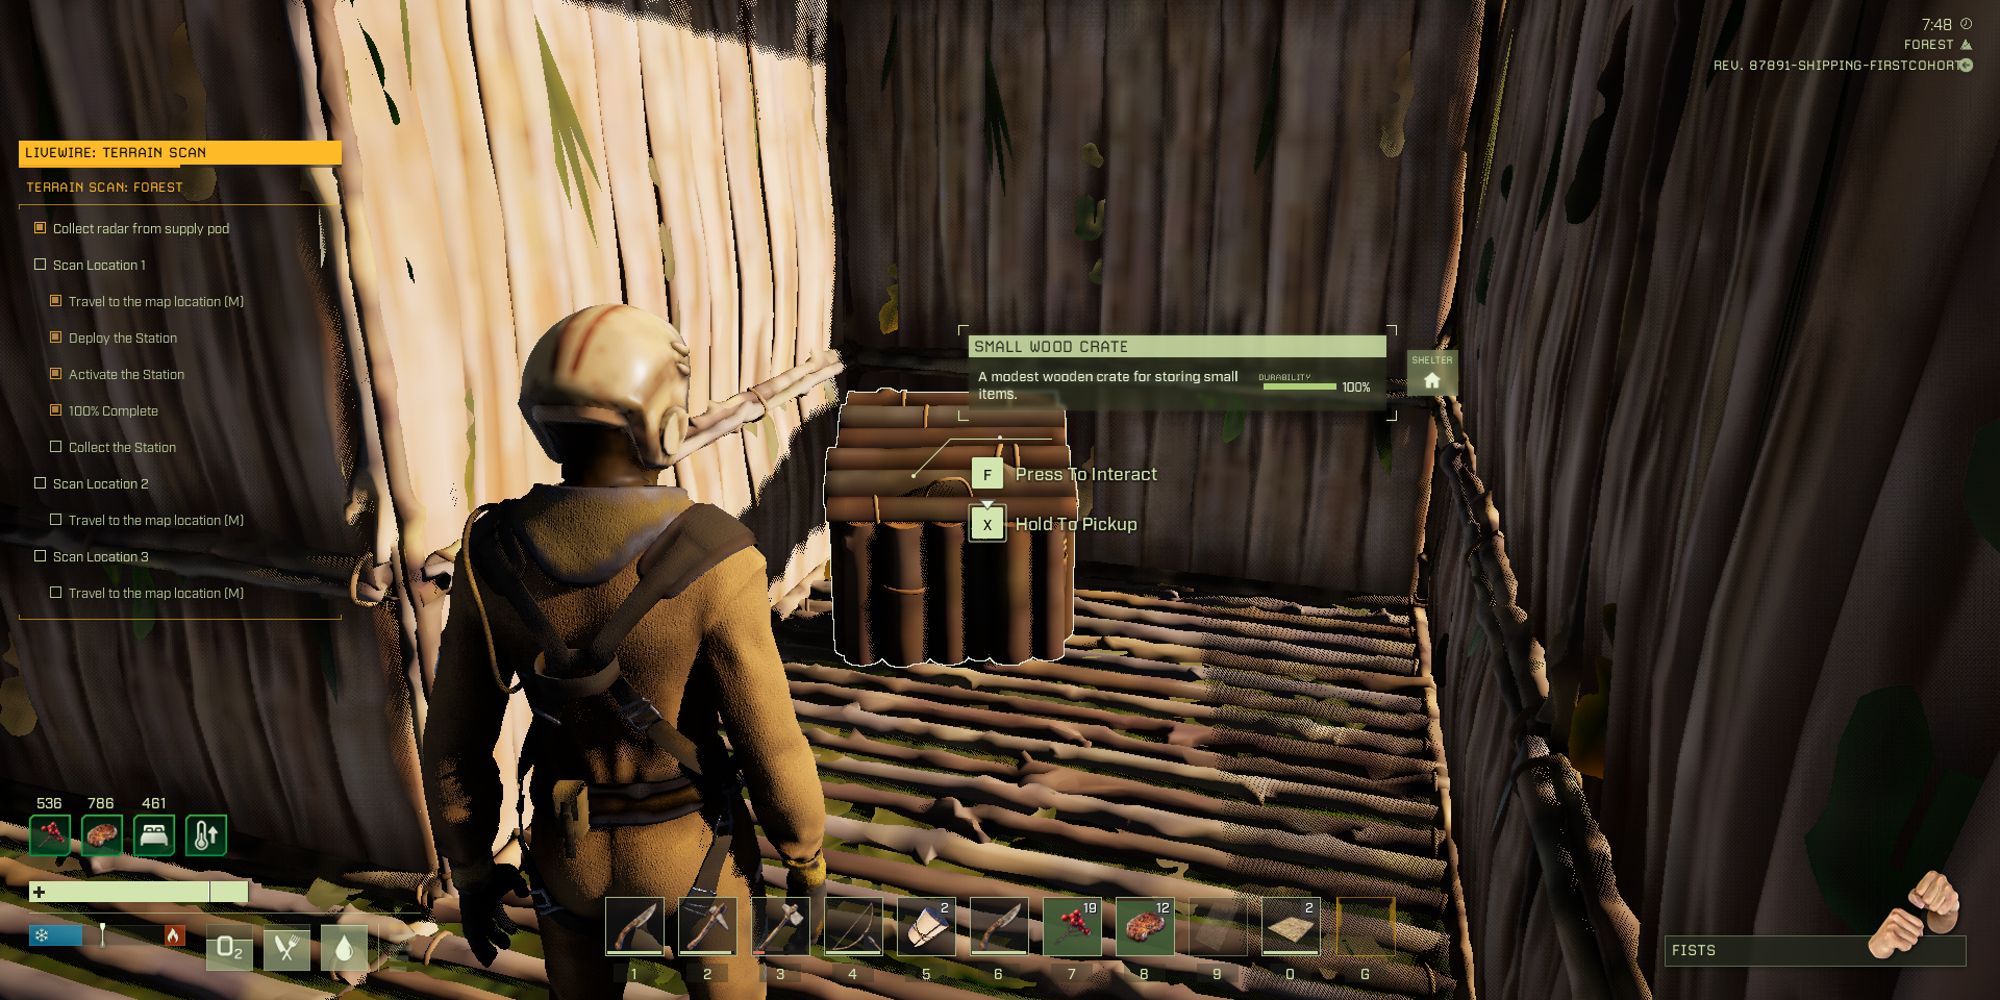 player standing in small hut with wooden chest